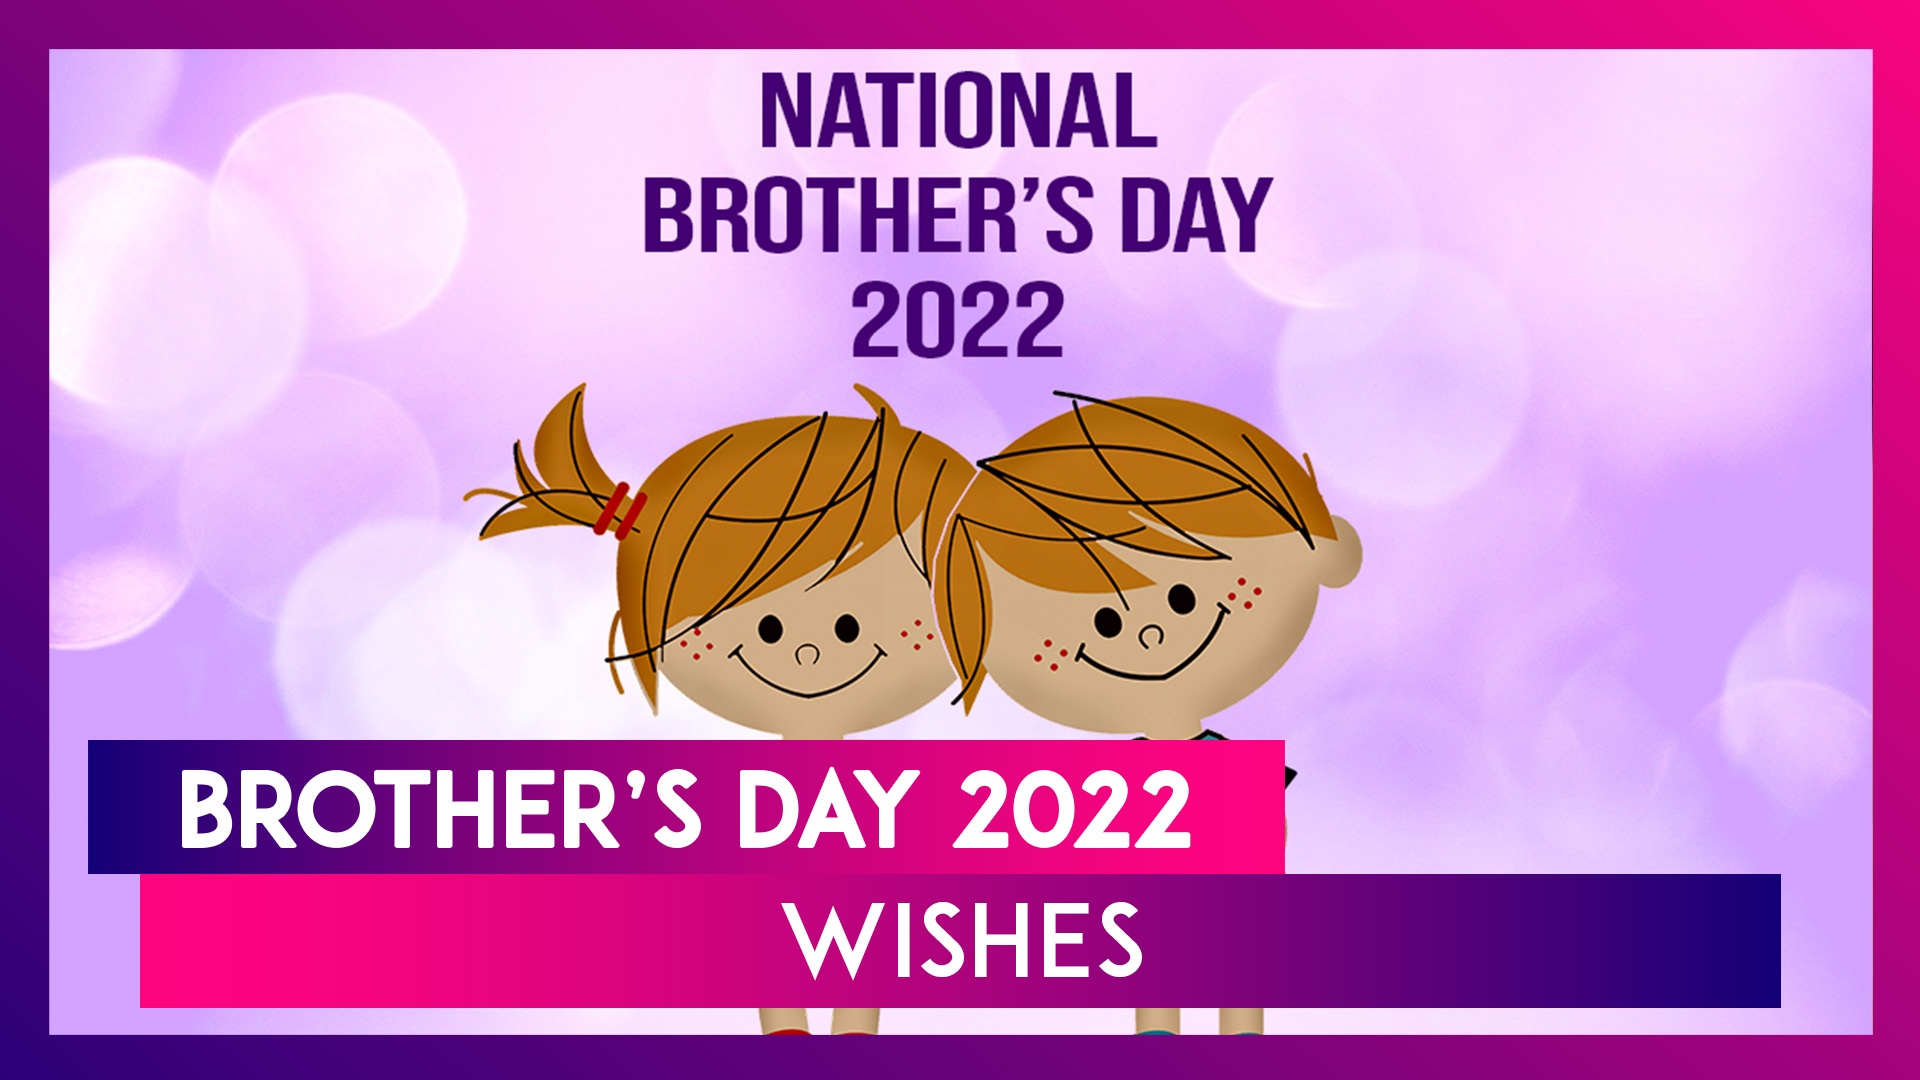 Brother’s Day 2022 Wishes: Images, Messages, Greetings and Quotes To Celebrate Your Male Siblings